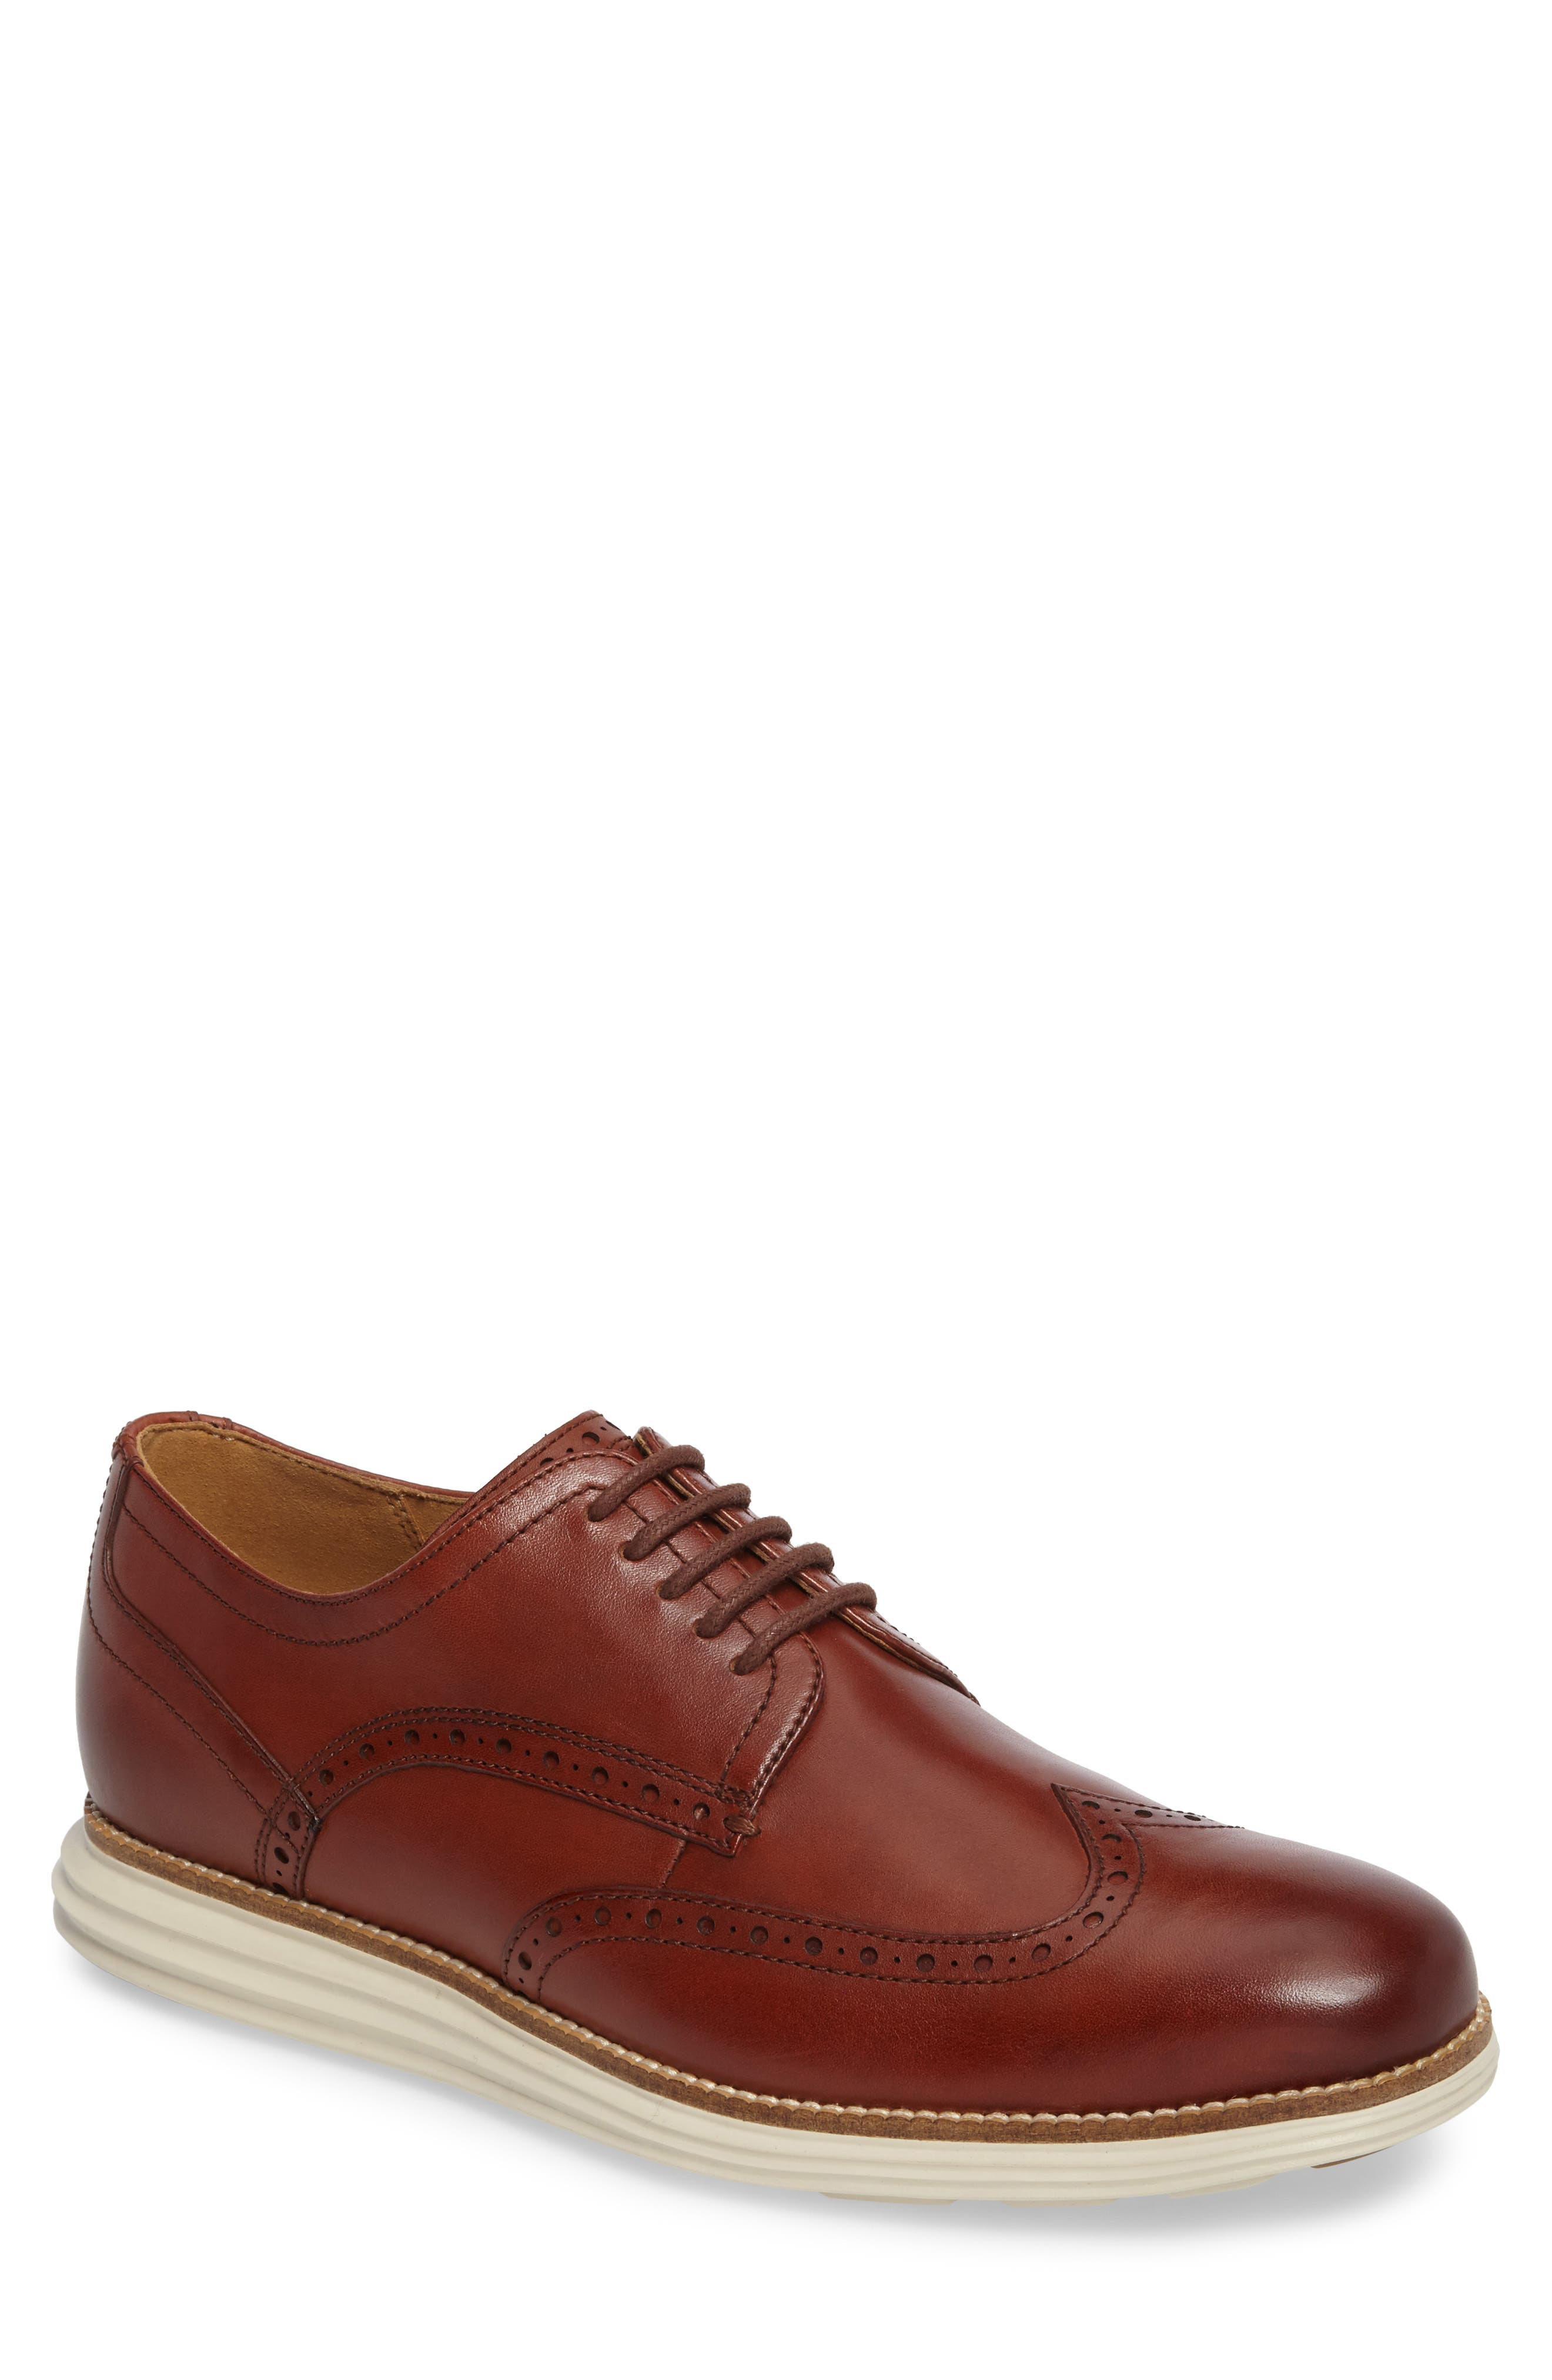 cole haan mens shoes clearance